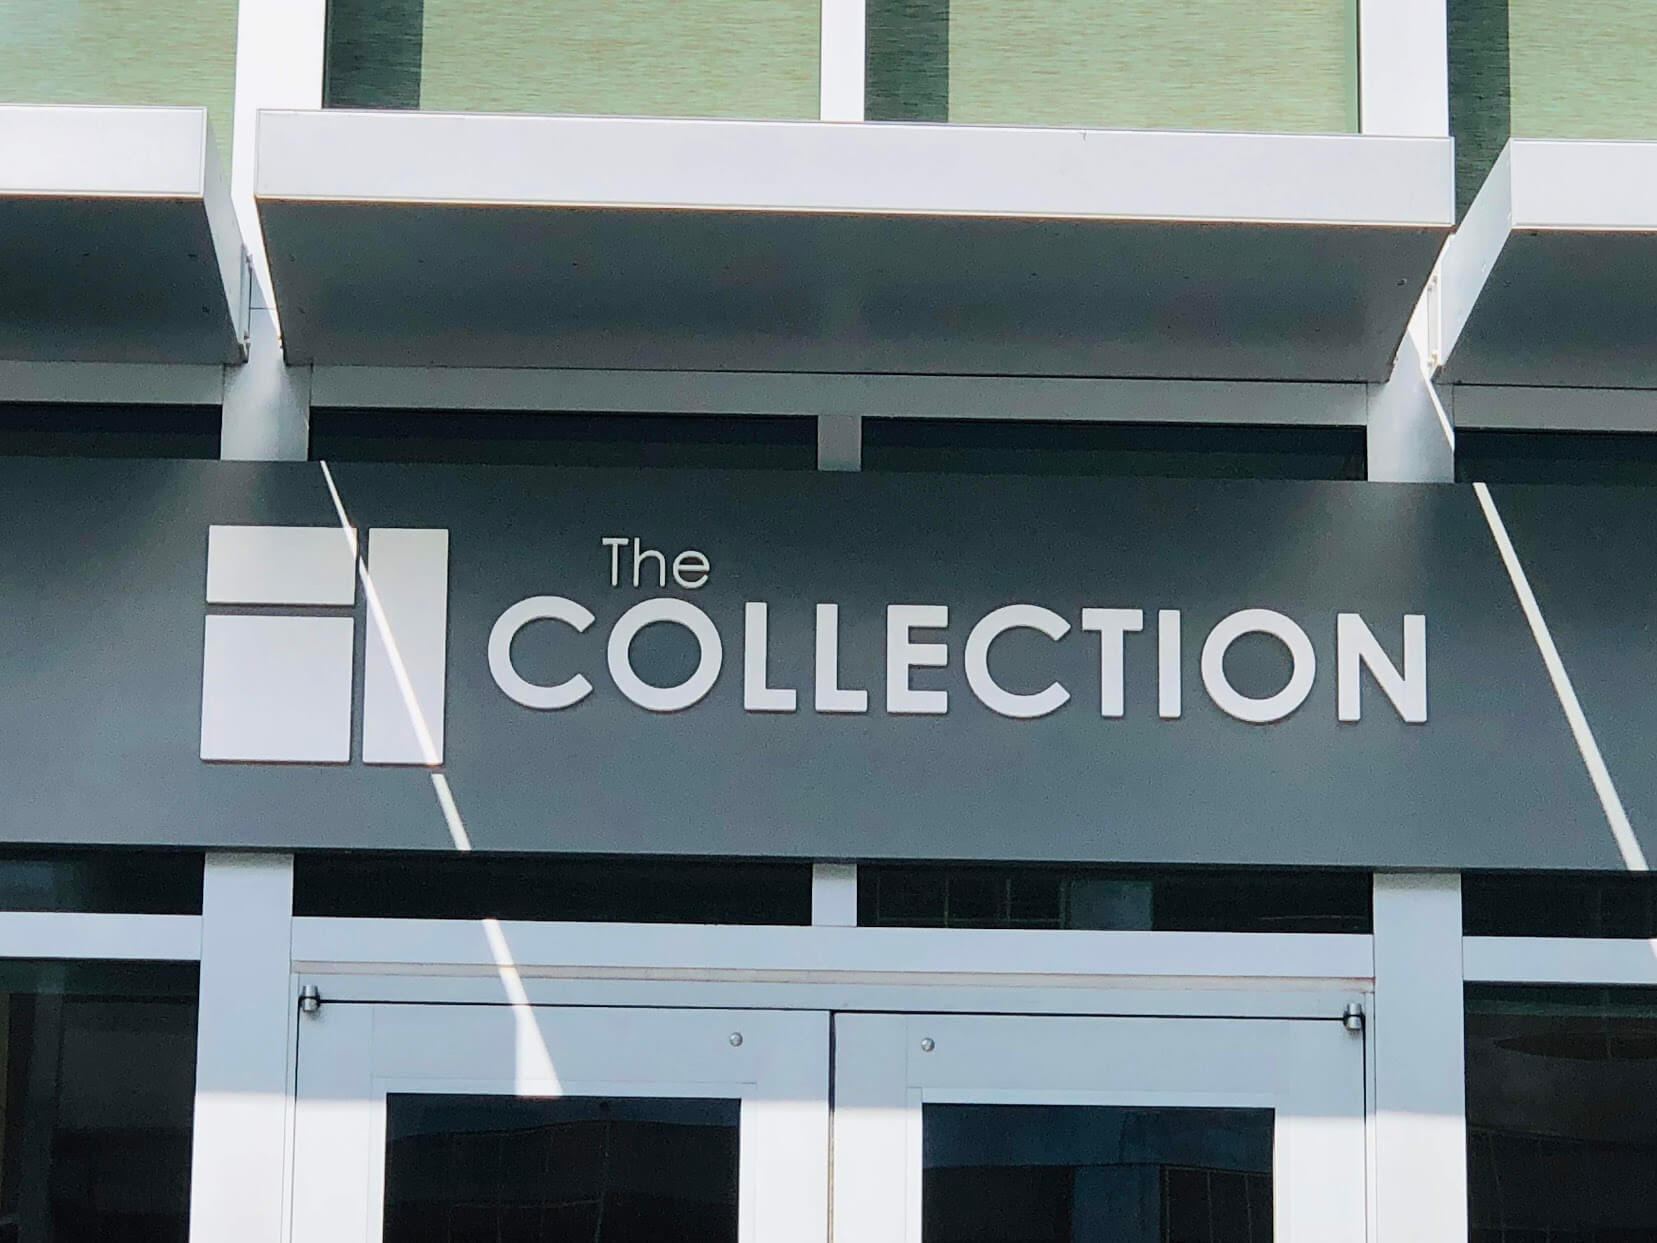 The Collectionの看板